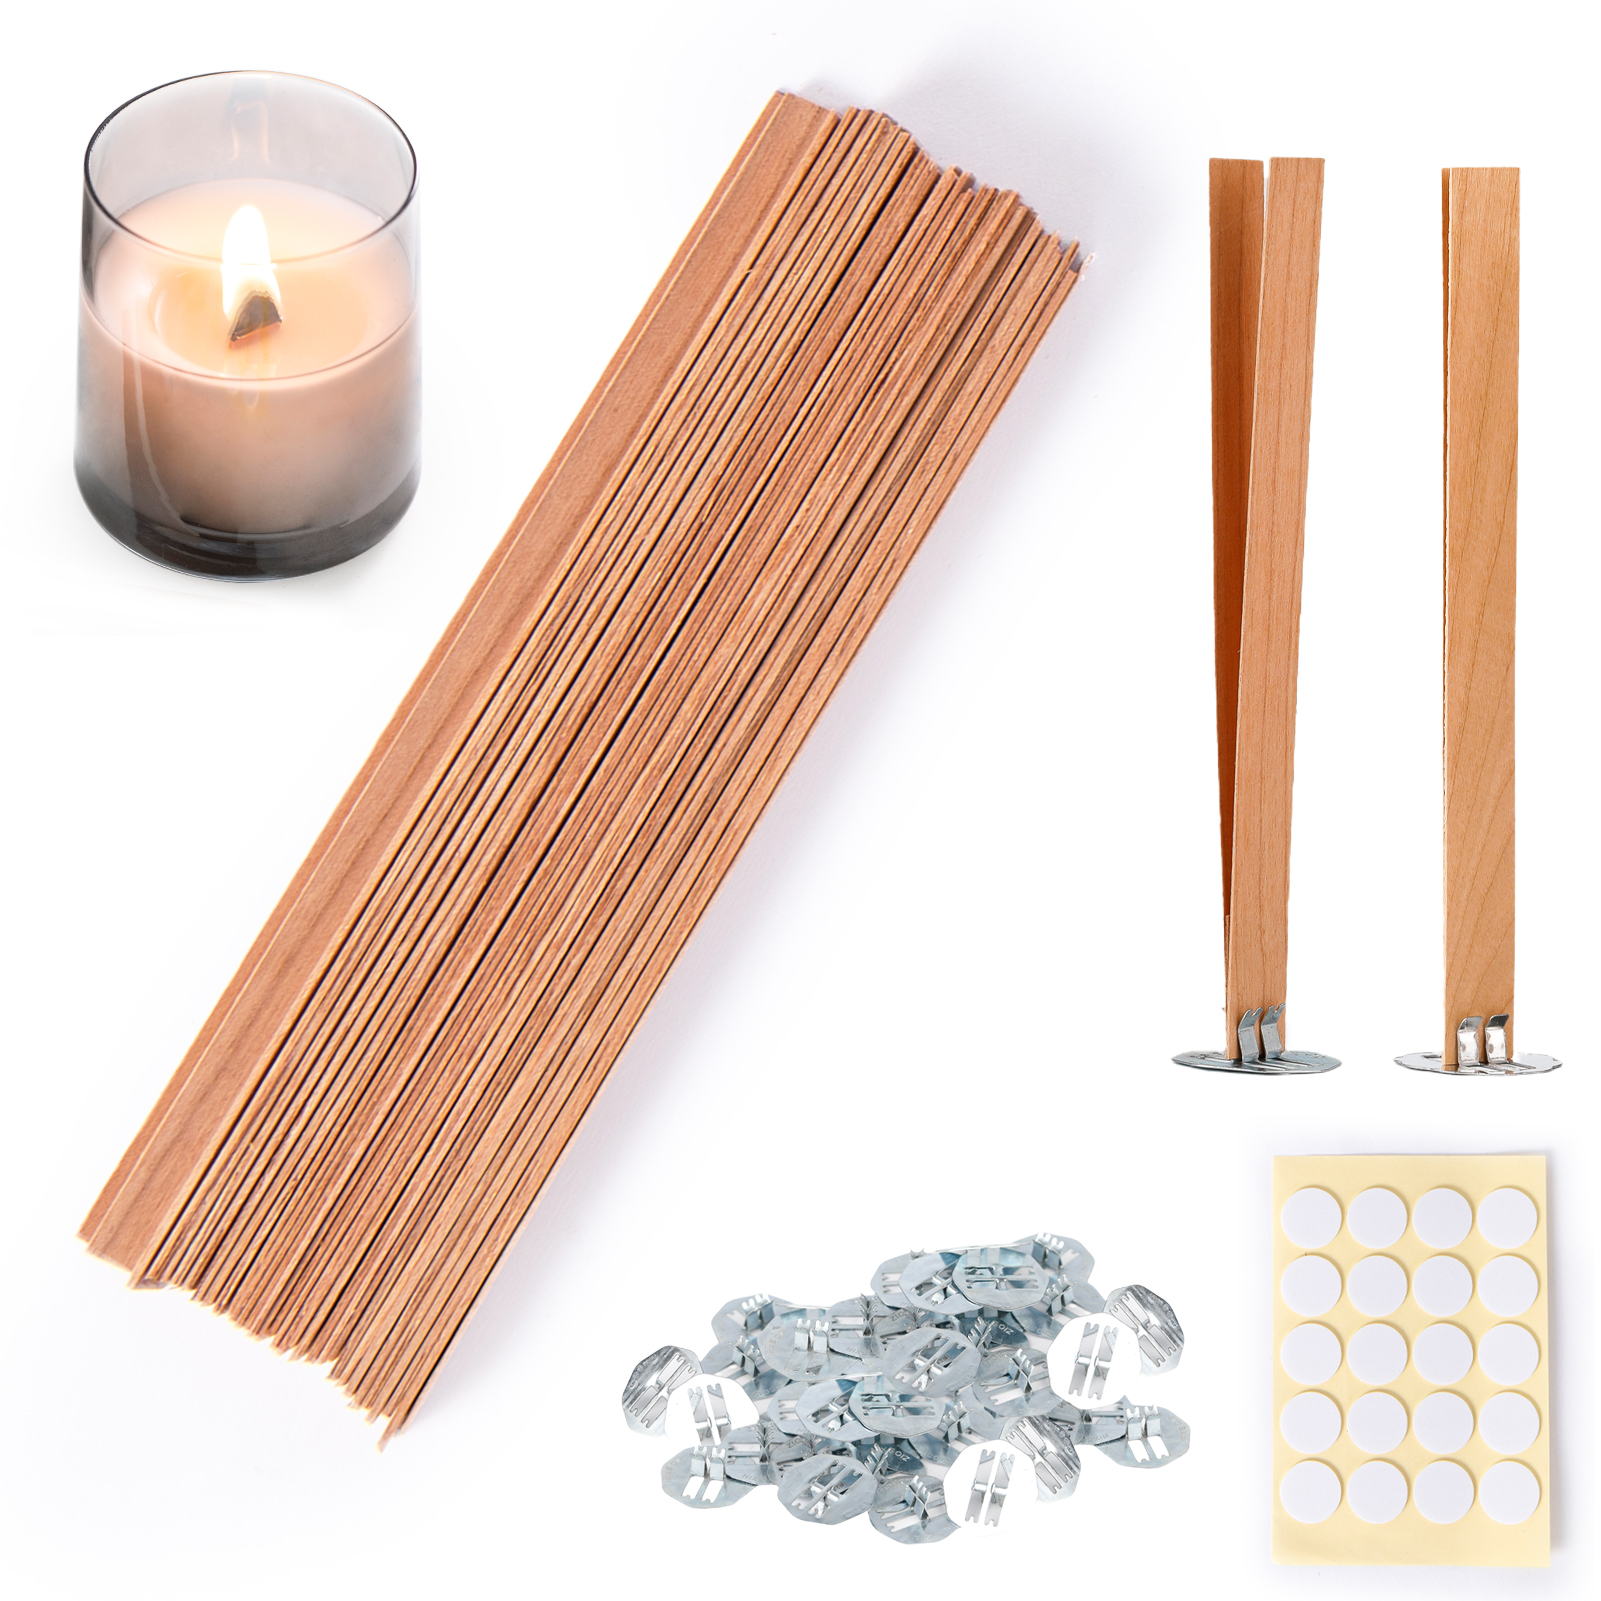 Wood Wicks For Beginners • Armatage Candle Company